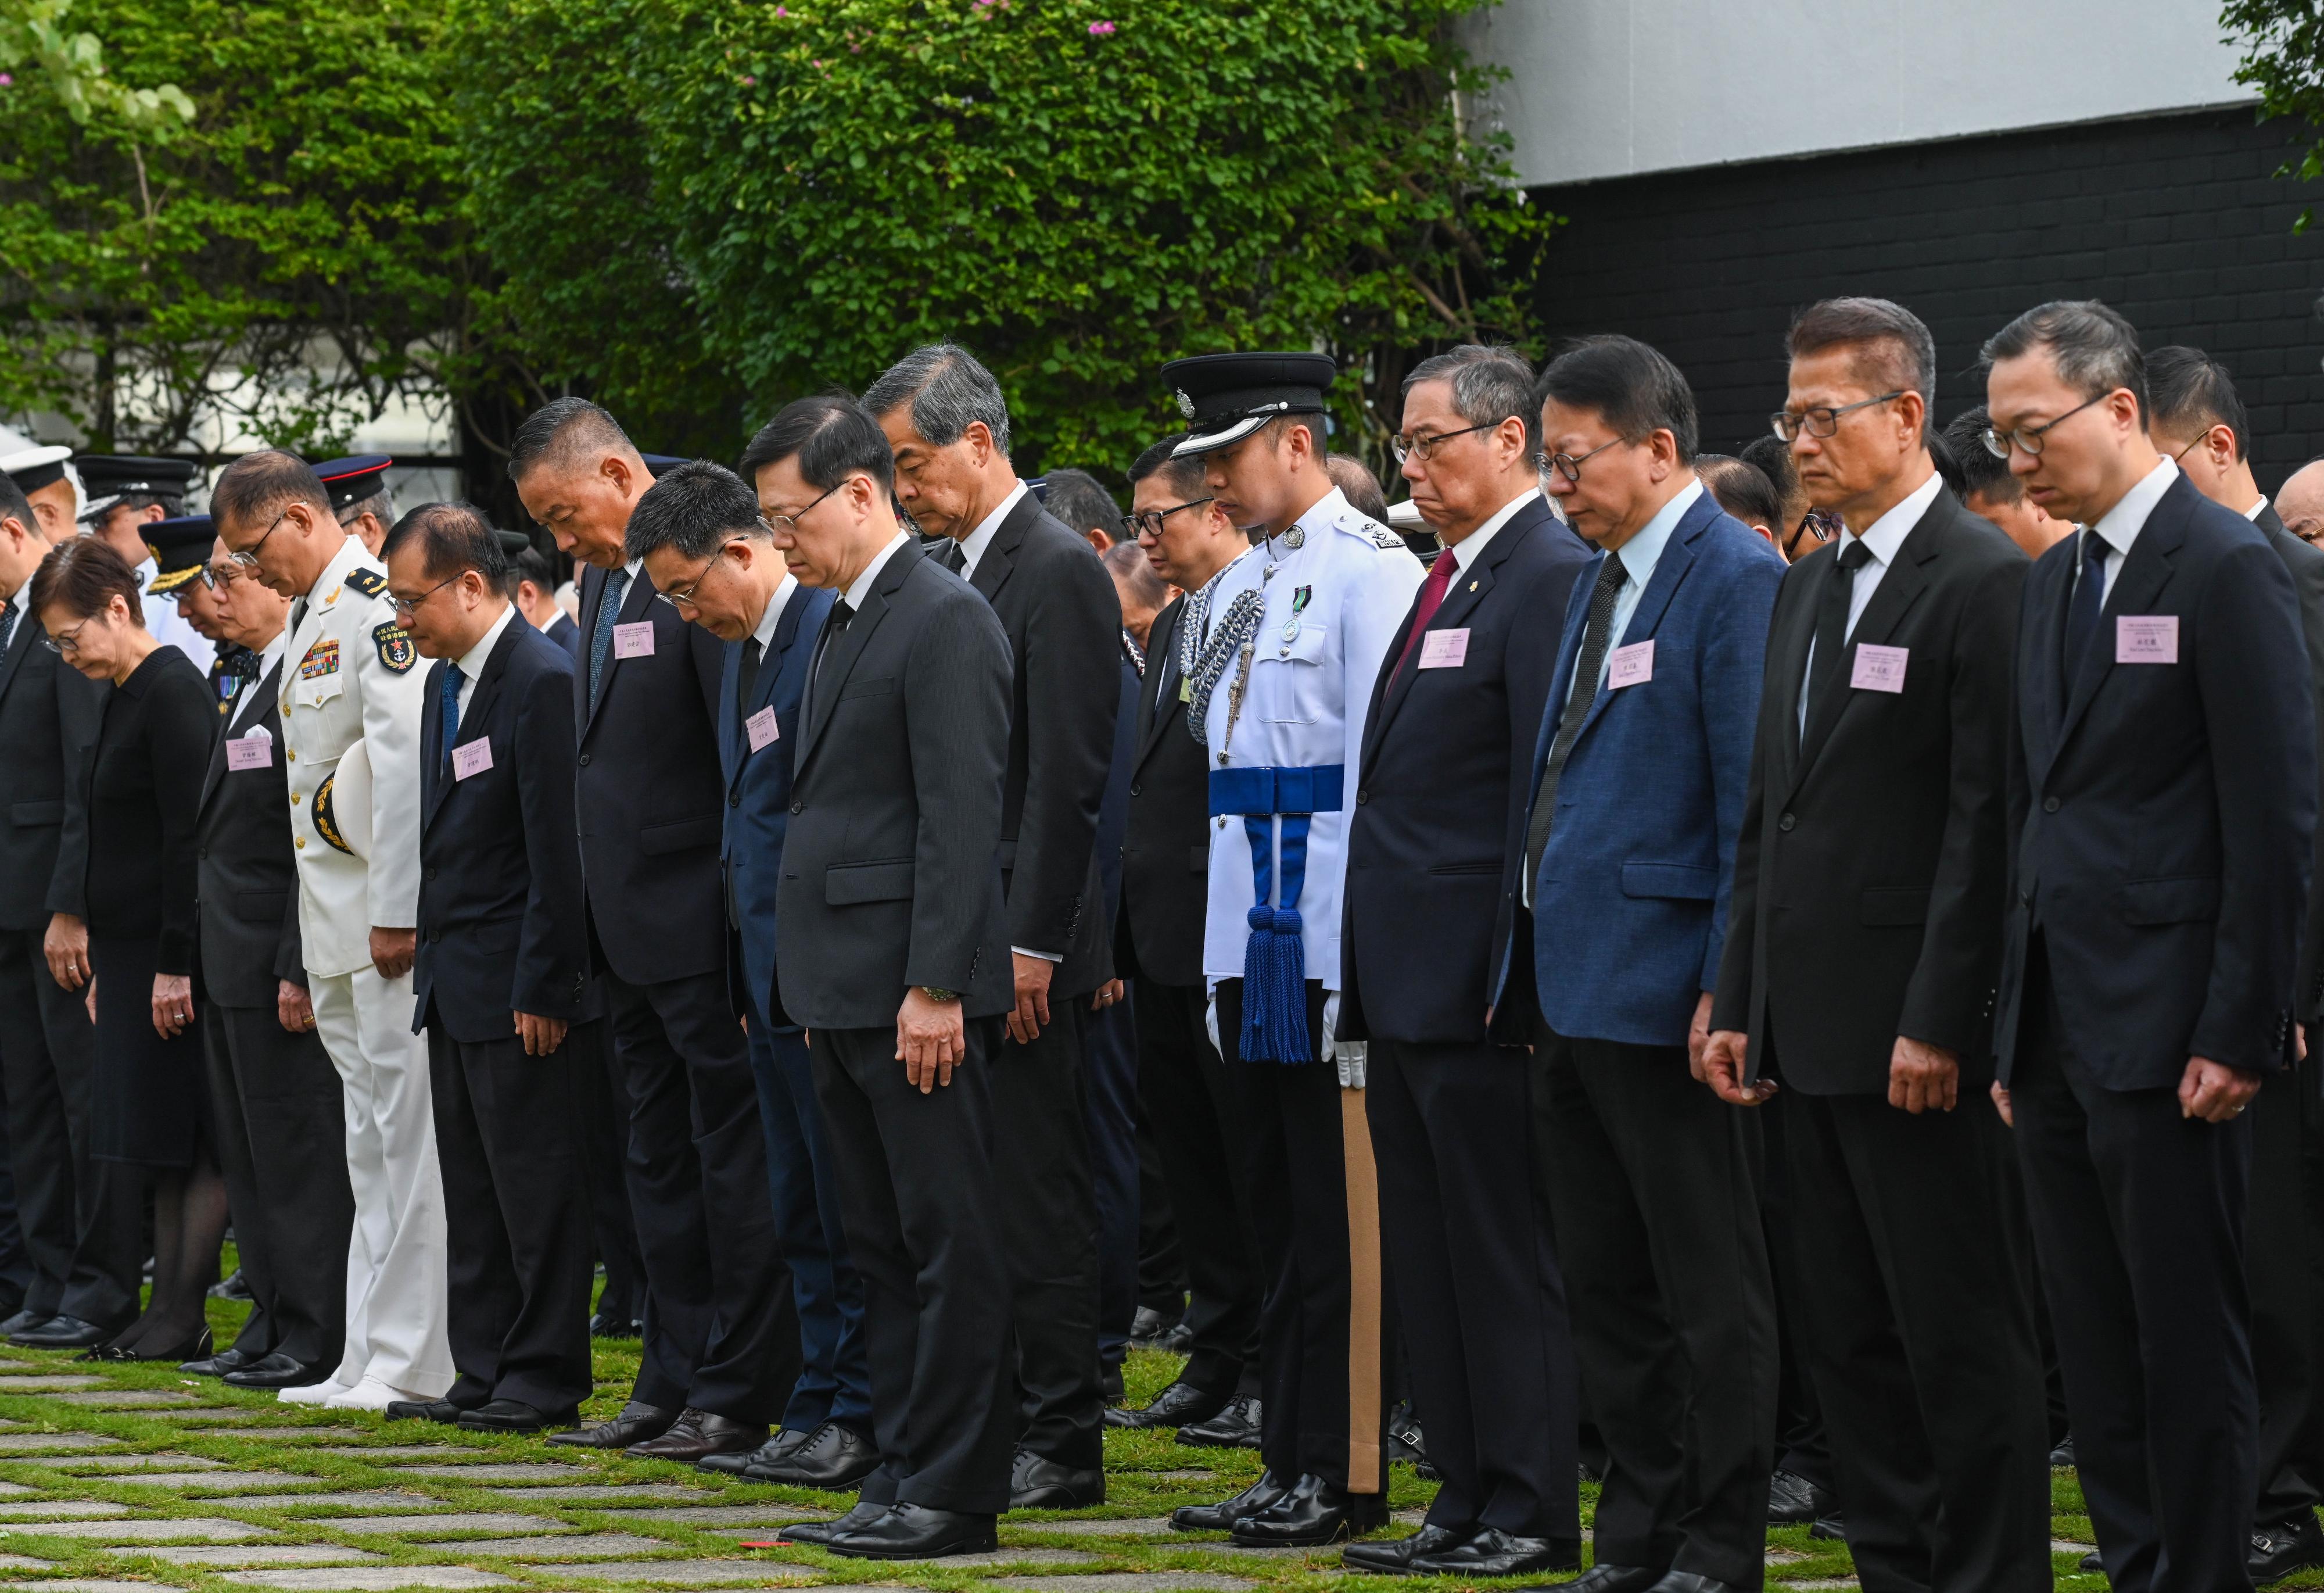 The Chief Executive, Mr John Lee, attended a ceremony to commemorate the victory day of the Chinese People's War of Resistance Against Japanese Aggression at Hong Kong City Hall Memorial Garden this morning (September 3). Photo shows (front row, from right) the Secretary for Justice, Mr Paul Lam, SC; the Financial Secretary, Mr Paul Chan; the Chief Secretary for Administration, Mr Chan Kwok-ki; the Acting Chief Justice of the Court of Final Appeal, Mr Justice Roberto Alexandre Vieira Ribeiro; the Aide-de-Camp, Mr Ralph Chong; Mr John Lee; Vice-Chairman of the National Committee of the Chinese People's Political Consultative Conference Mr C Y Leung; Deputy Secretary General of the Liaison Office of the Central People's Government in the Hong Kong Special Administrative Region (HKSAR) Mr Xiao Youmei; the Director of the liaison office of the Office for Safeguarding National Security of the Central People's Government in the HKSAR, Mr Deng Jianwei; the Acting Commissioner of the Office of the Commissioner of the Ministry of Foreign Affairs of the People's Republic of China in the HKSAR, Mr Fang Jianming; Deputy Commander of the Chinese People's Liberation Army Hong Kong Garrison Navy Rear Admiral Tan Zhiwei; former Chief Executive Mr Donald Tsang and former Chief Executive Mrs Carrie Lam attending the ceremony.

